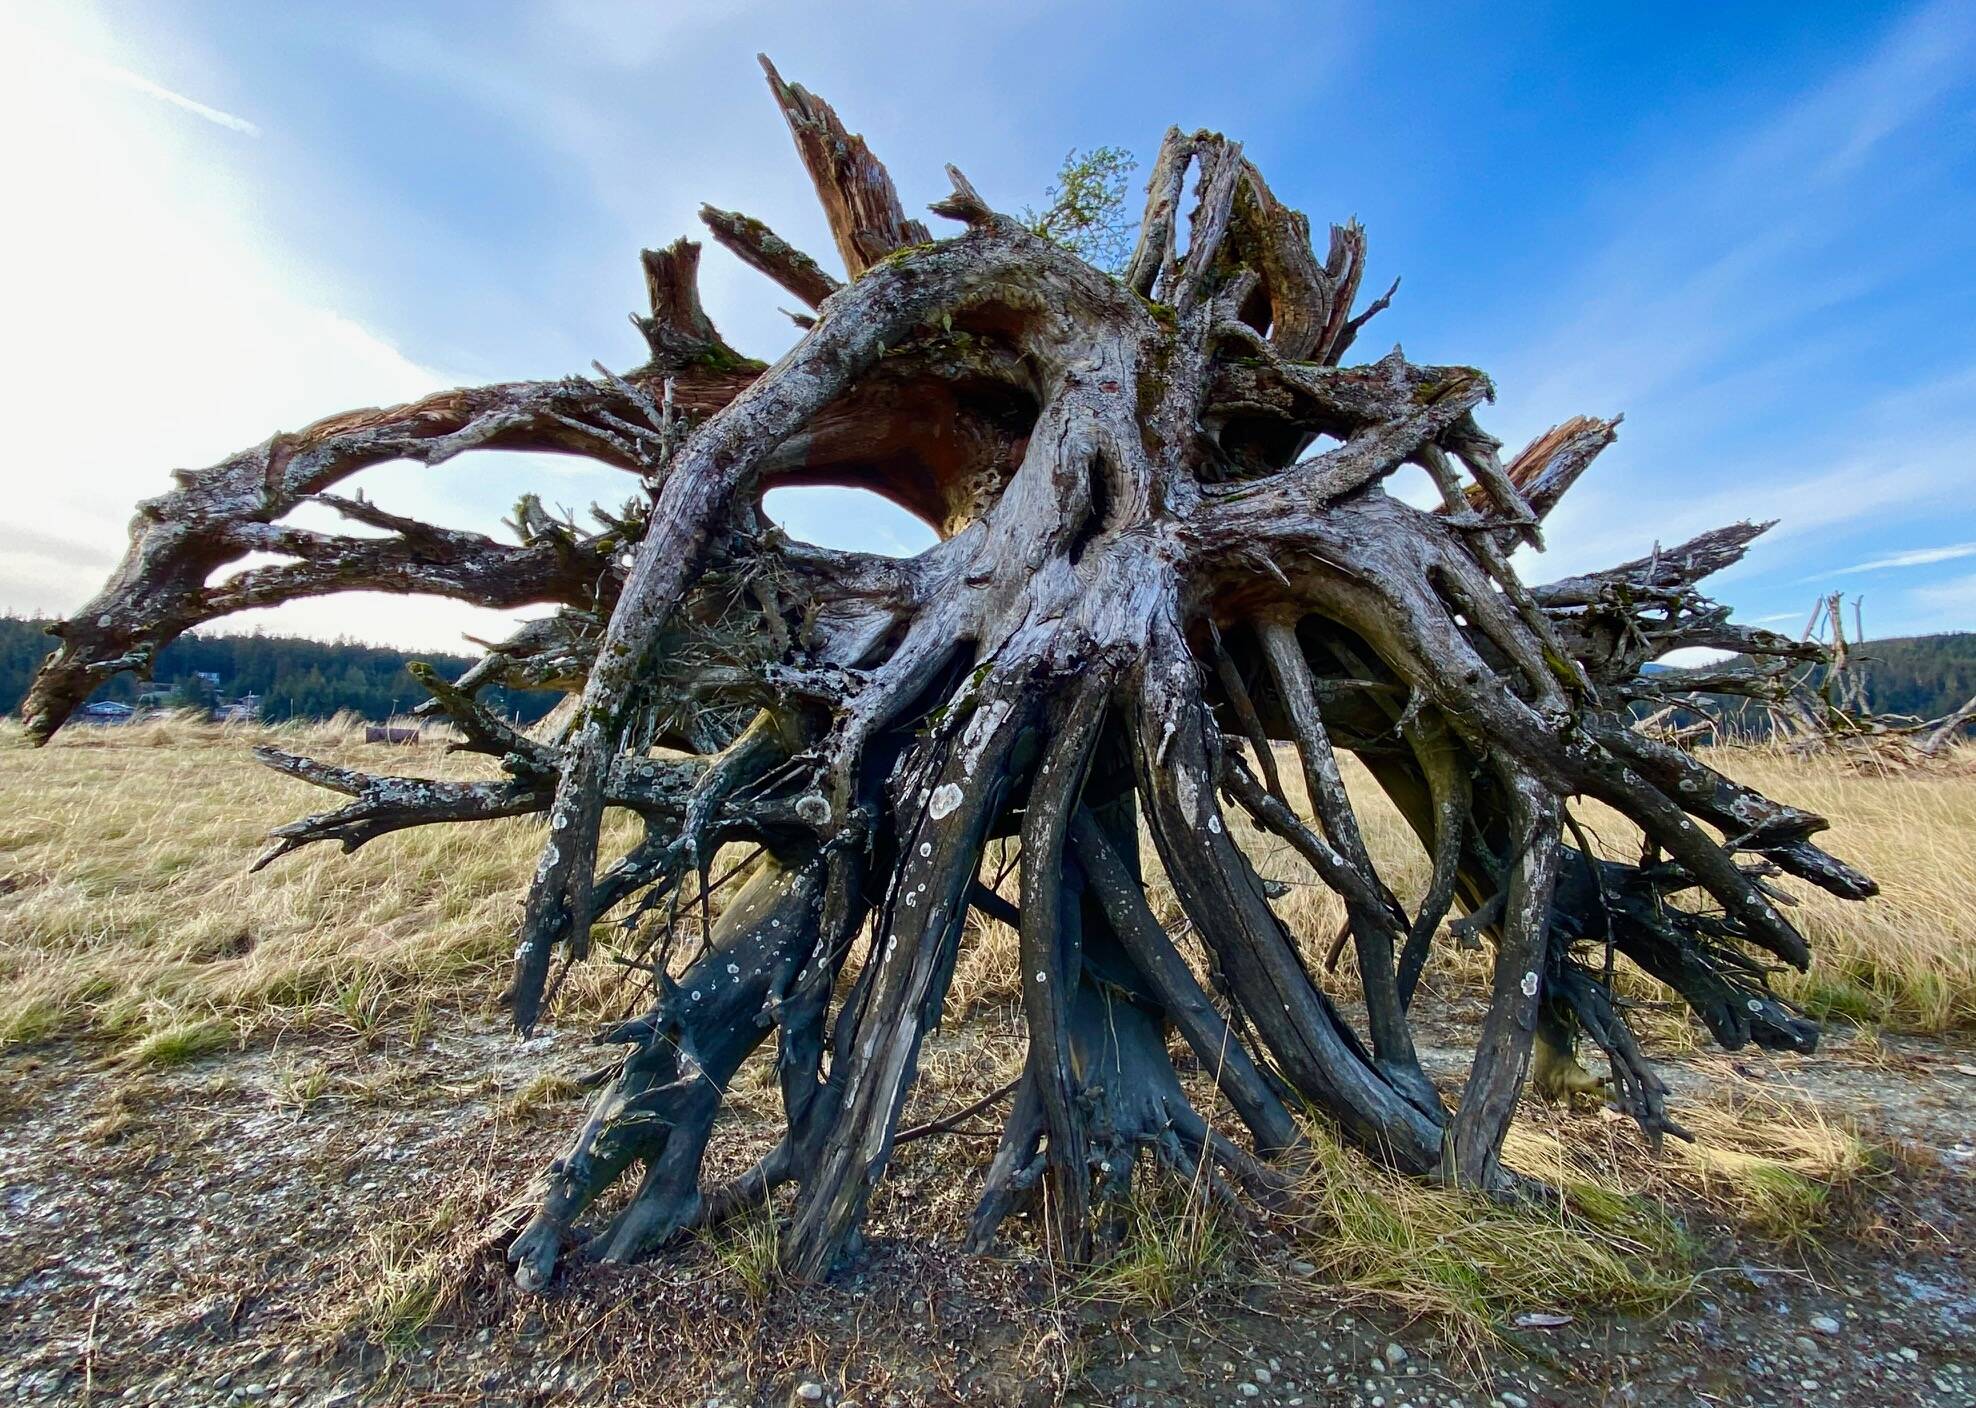 An old root system makes a perfect sculpture in the Mendenhall wetlands on Oct. 22. (Photo by Denise Carroll)